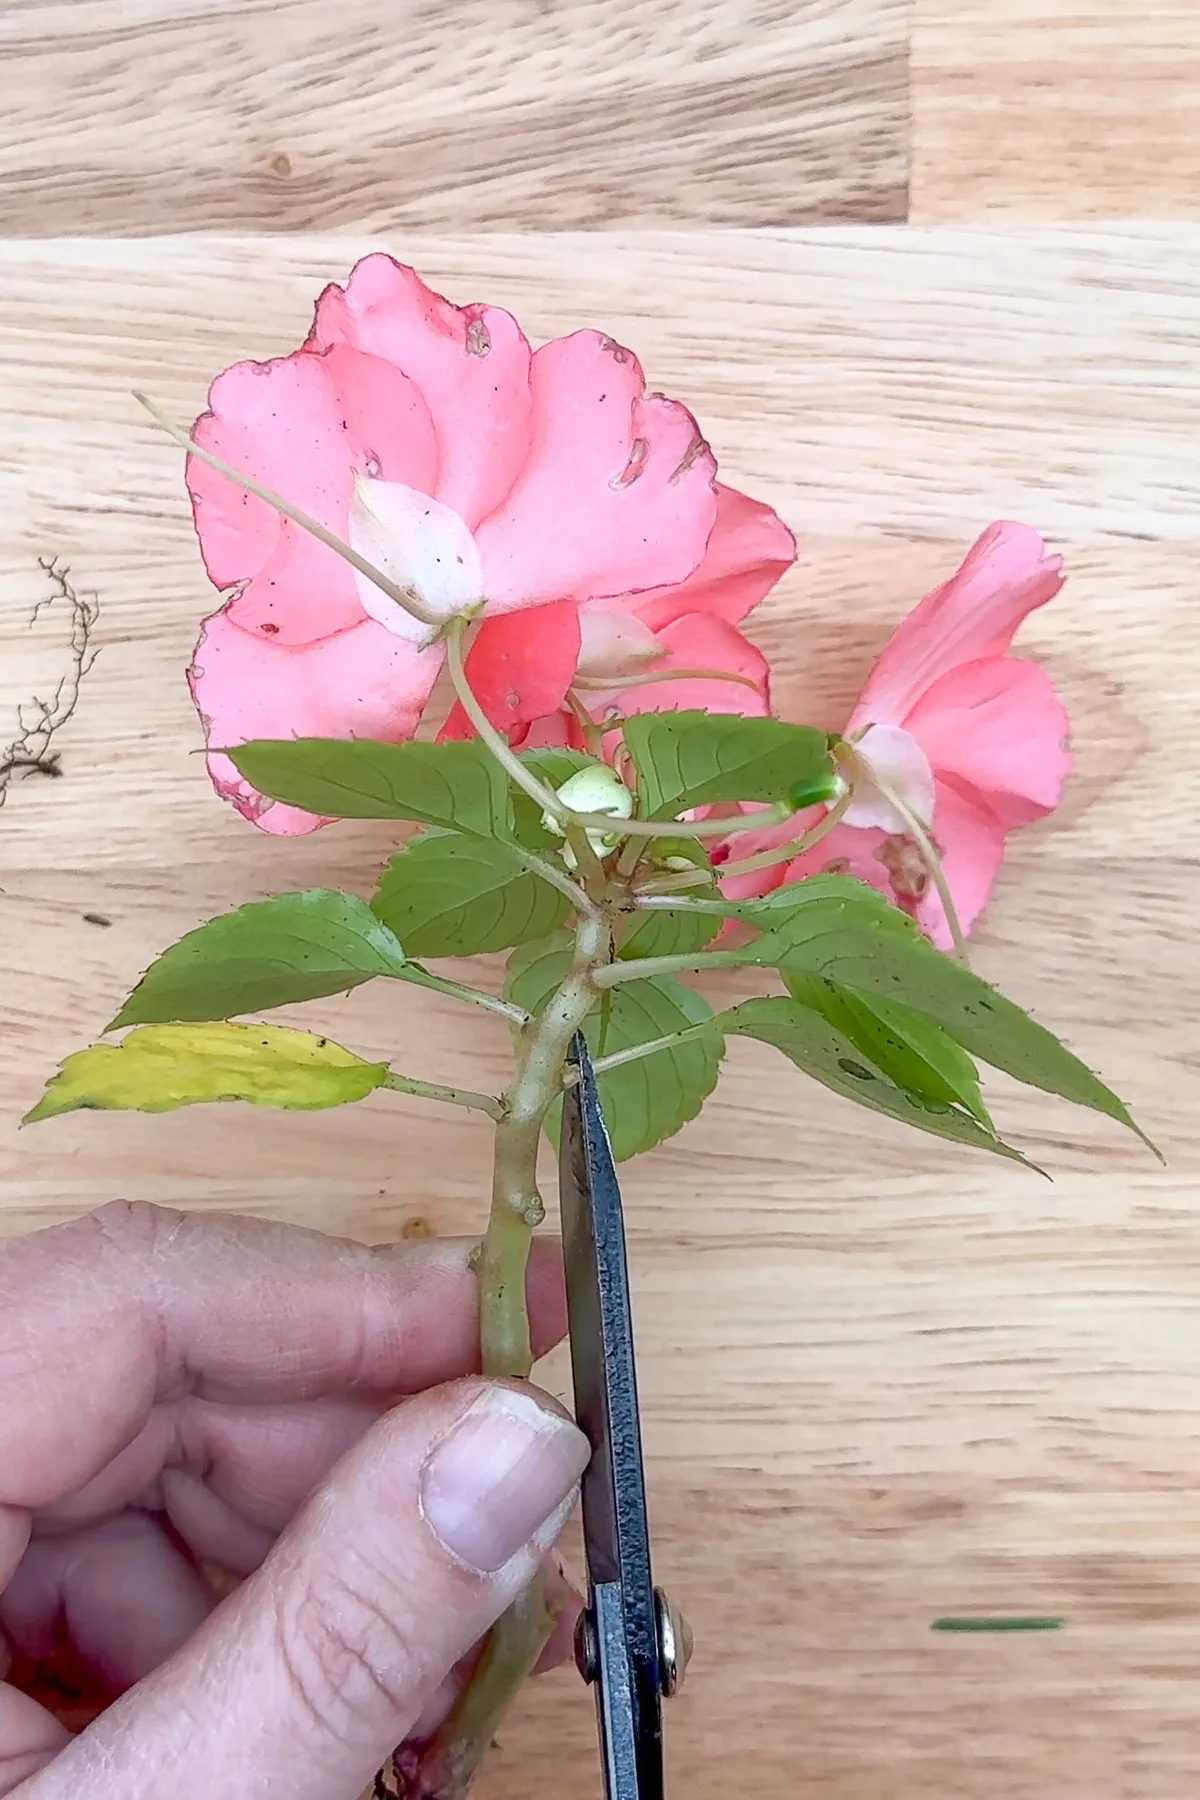 preparing an impatiens cutting by removing the lower leaves with scissors